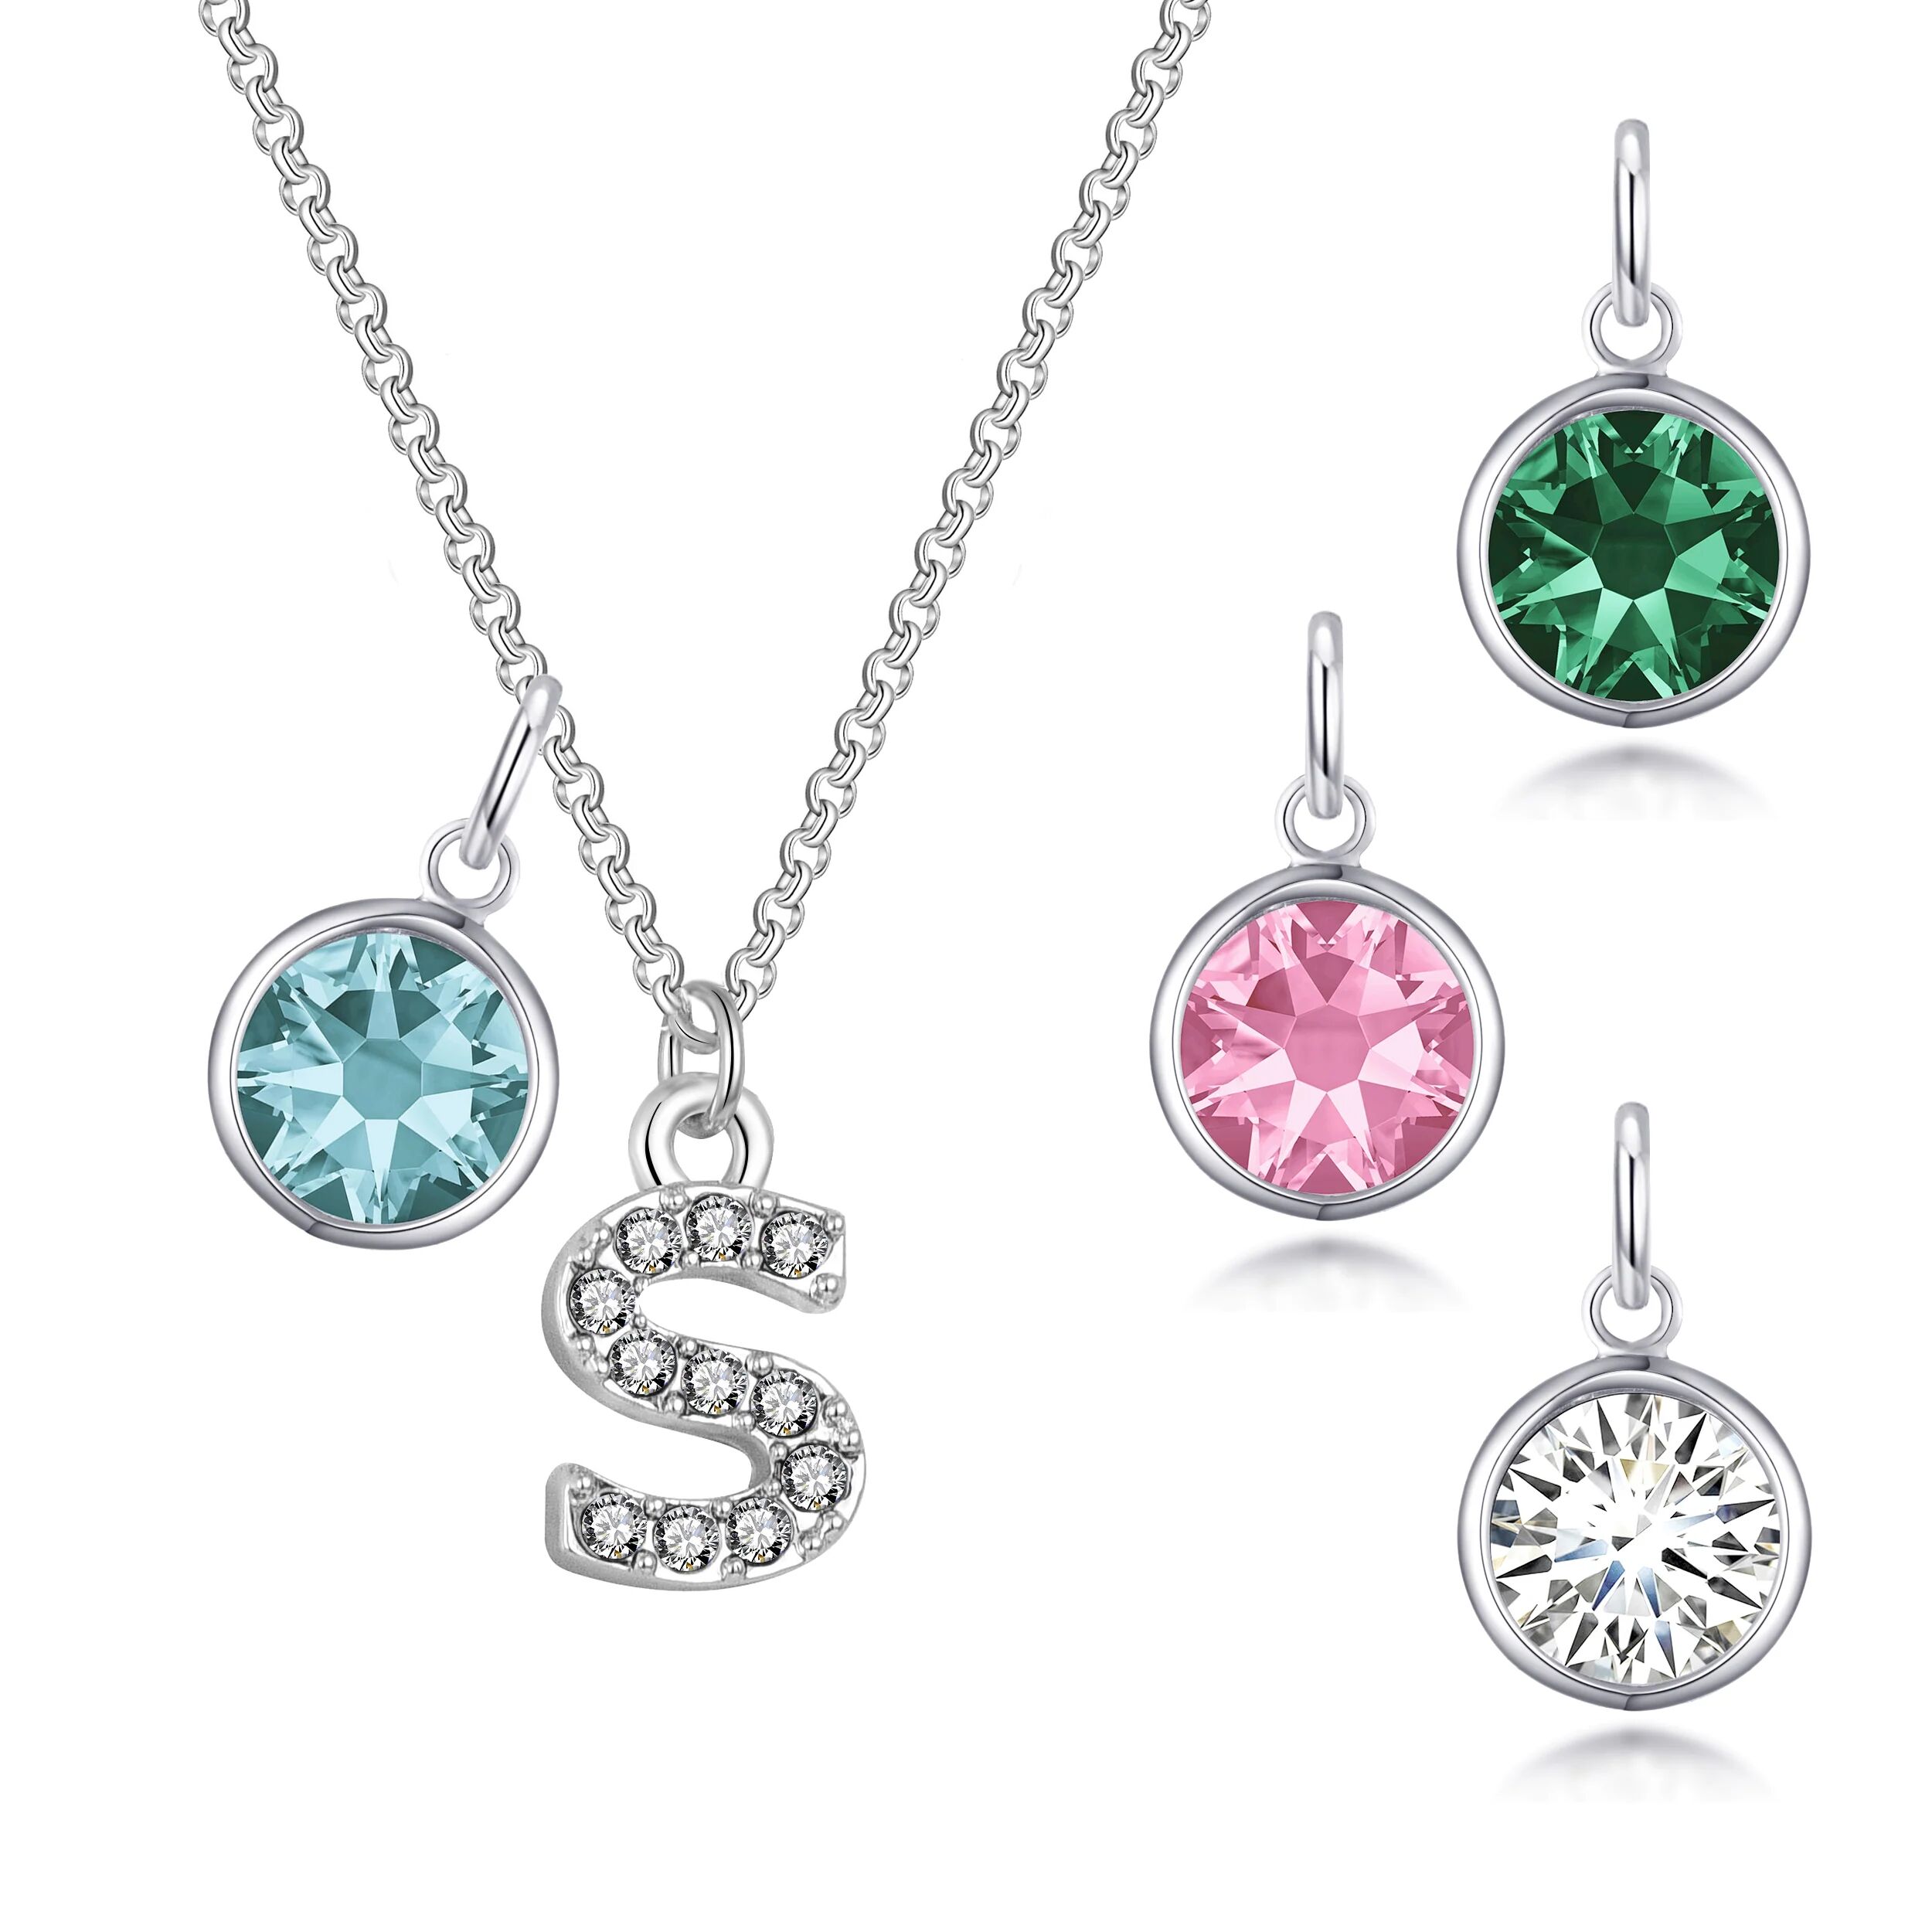 Philip Jones Jewellery Pave Initial S Necklace with Birthstone Charm Created with Zircondia® Crystals